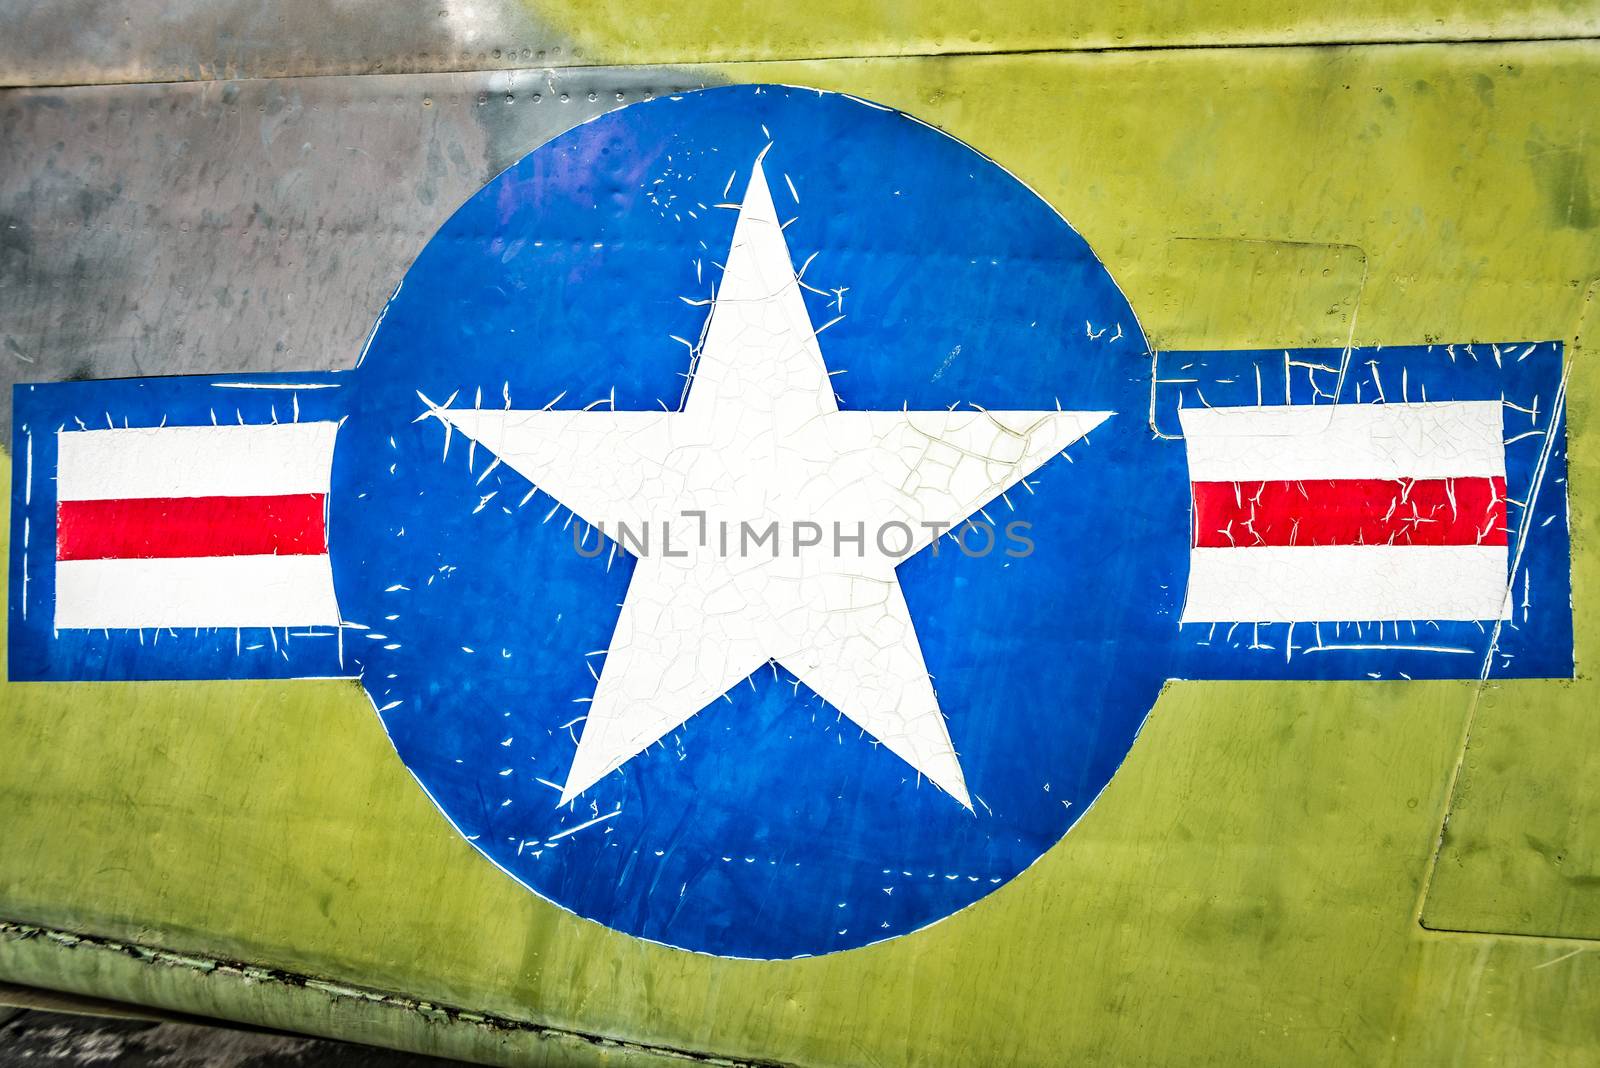 Part of military airplane with United States Air Force sign. Big white star in blue circle with stripes aside. War aircraft in metal plates. Military aviation. Retro style. Safety and protection.